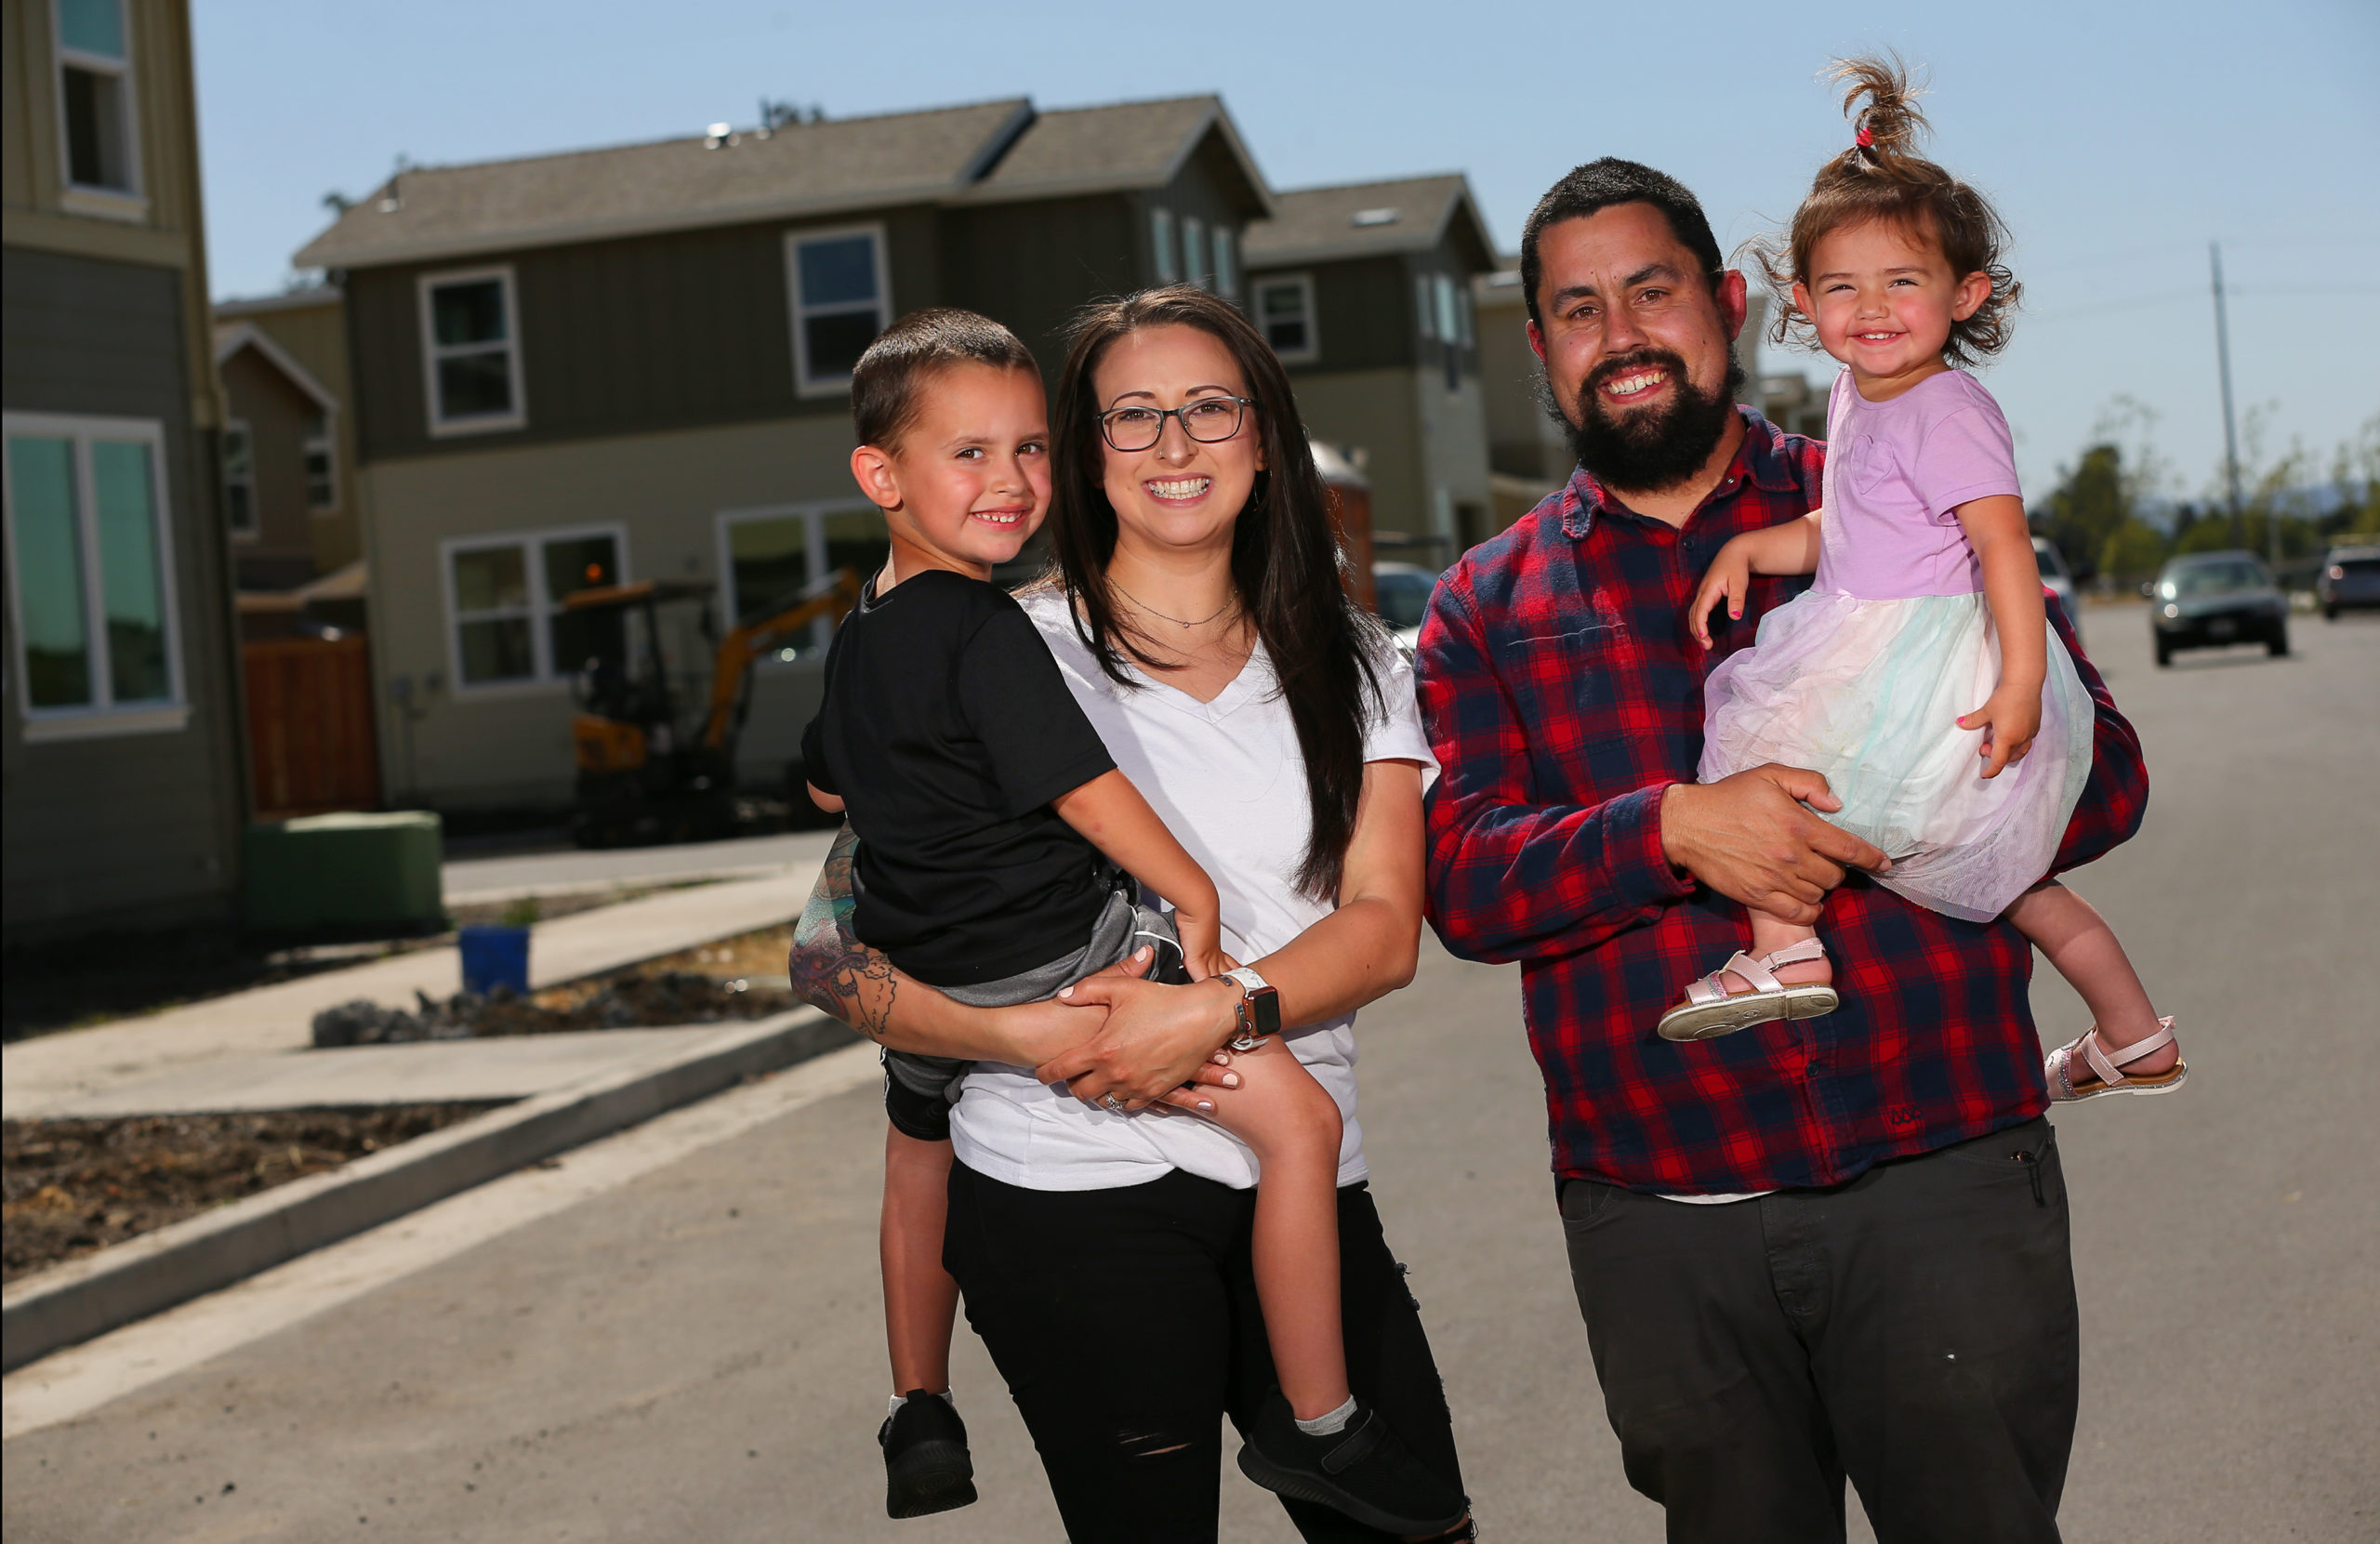 Stephanie and Greg Basurto, with their children Erich, 4, and Sheby, 2, purchased a duet style single family home at the Lantana Homes community by Burbank Housing Development Corporation in Santa Rosa. (Christopher Chung/ The Press Democrat)